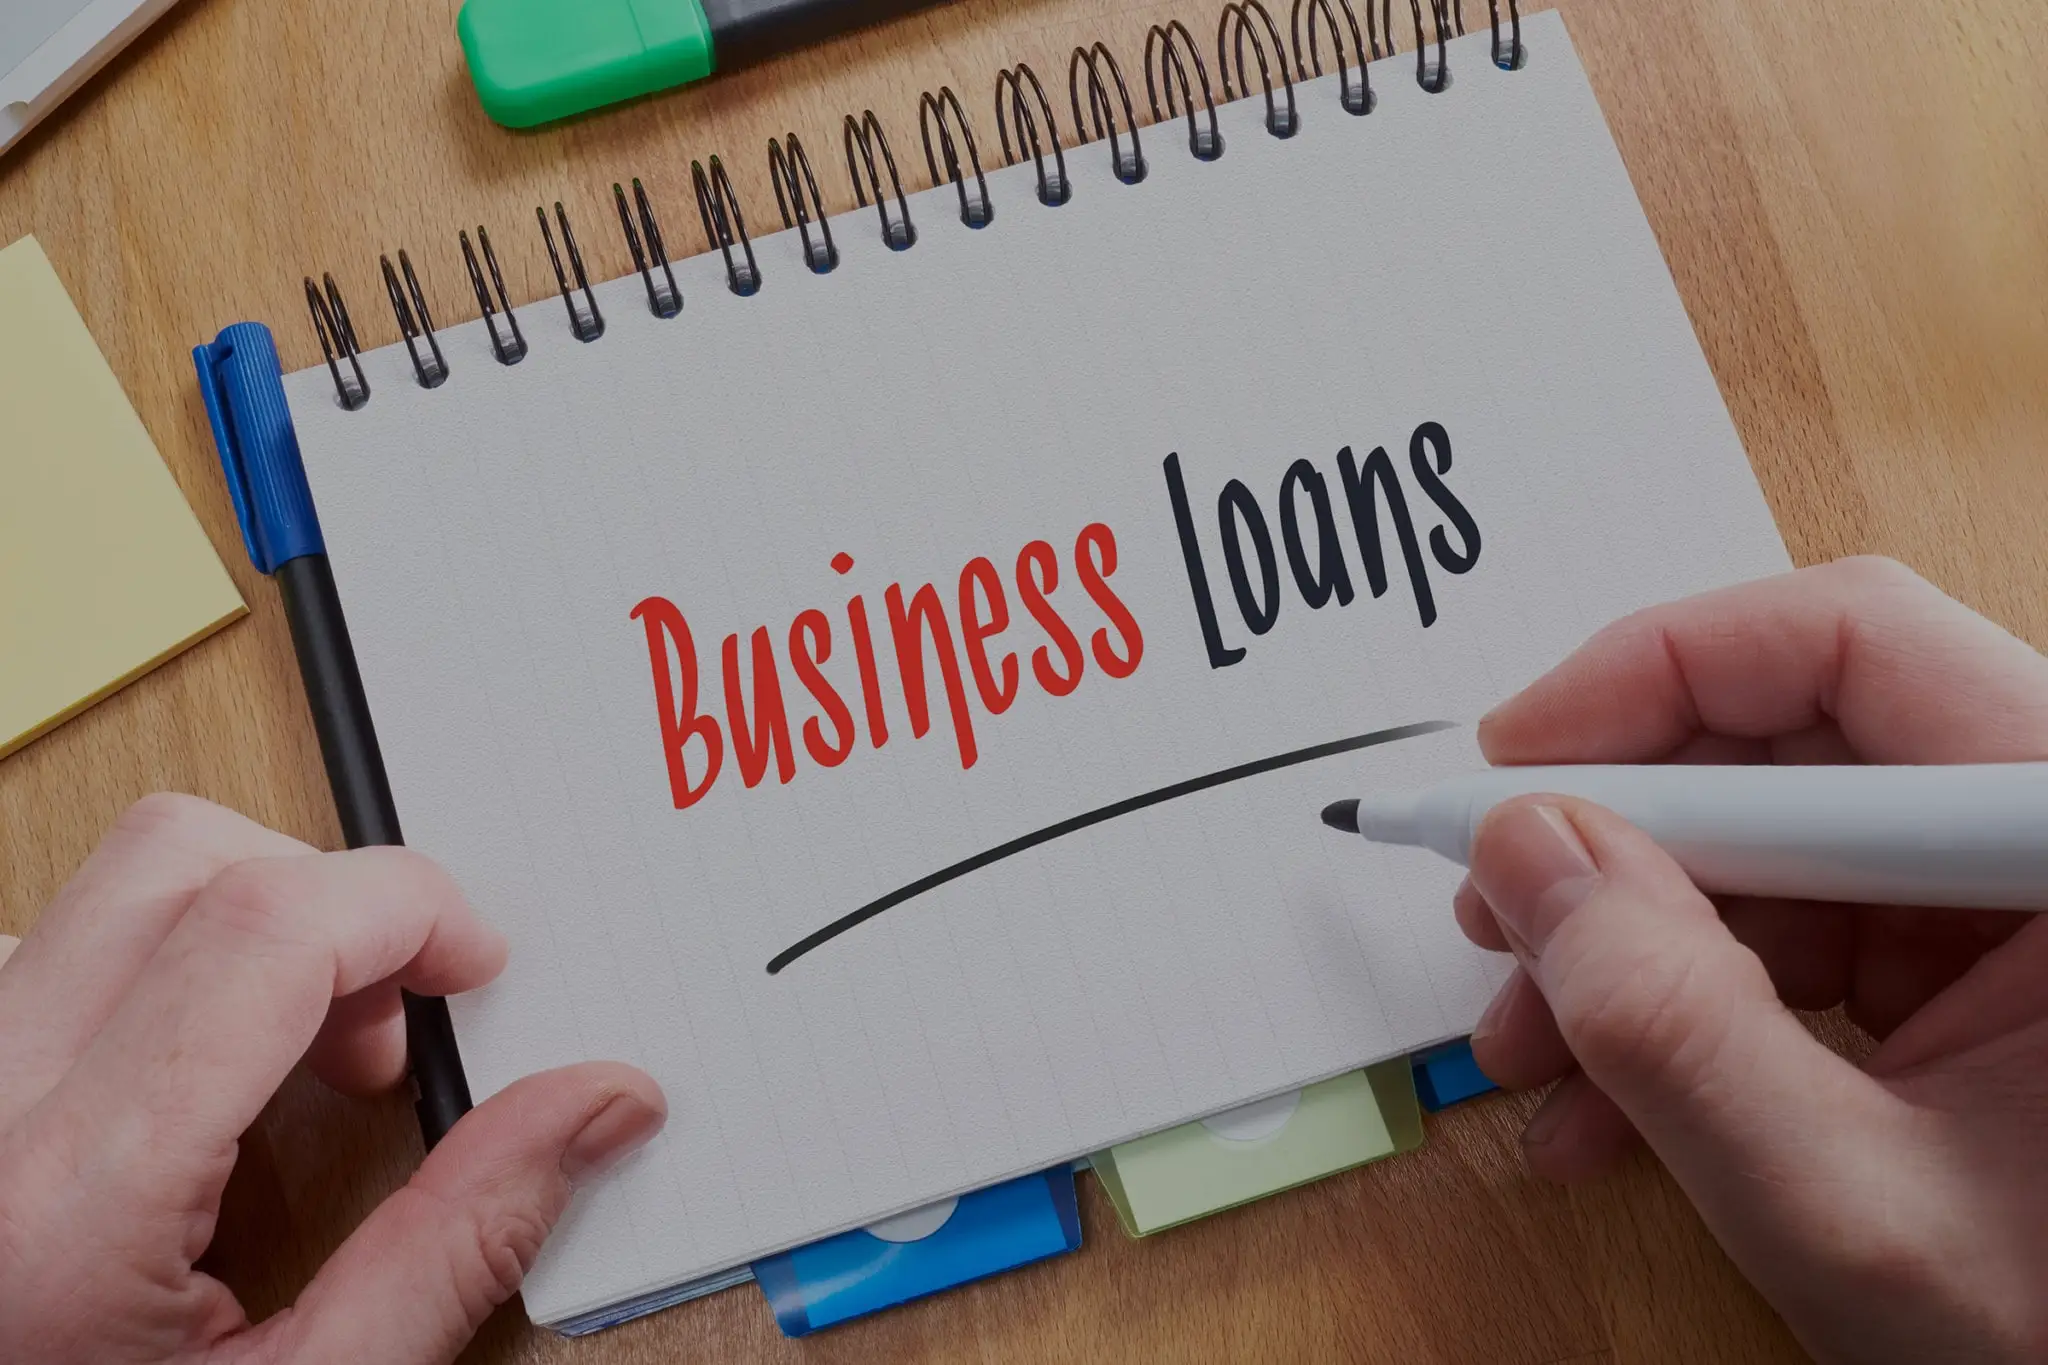 How to get a startup business loan with no money?